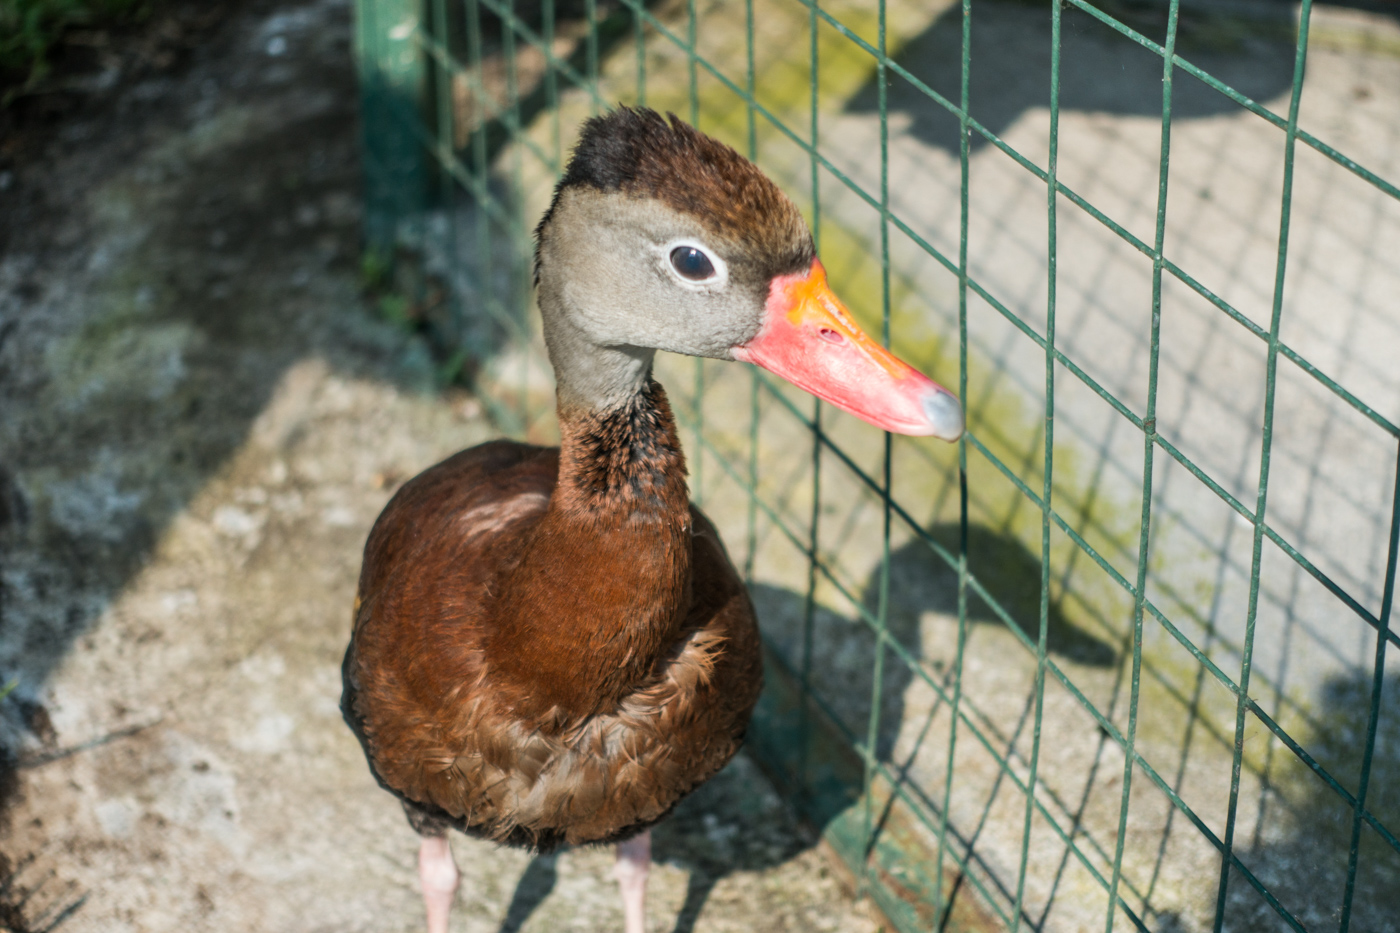 Emma the duck at the Toucan Rescue Ranch